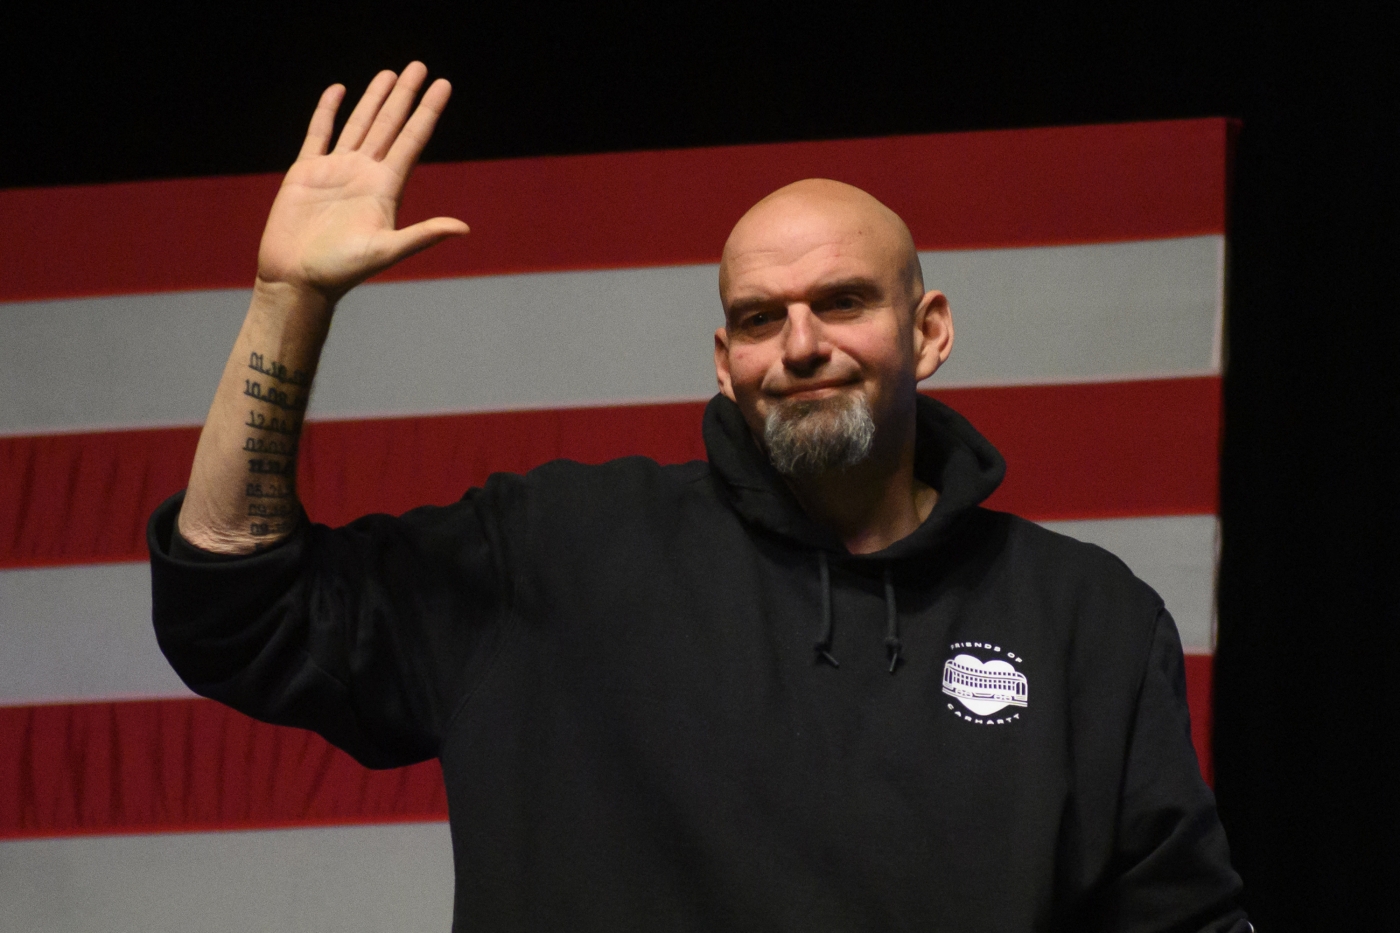 Democratic Senate candidate John Fetterman arrives for an election night party at StageAE on November 9, 2022 in Pittsburgh, Pennsylvania. Fetterman defeated Republican Senate candidate Dr. Mehmet Oz. Jeff Swensen/Getty Images/AFP